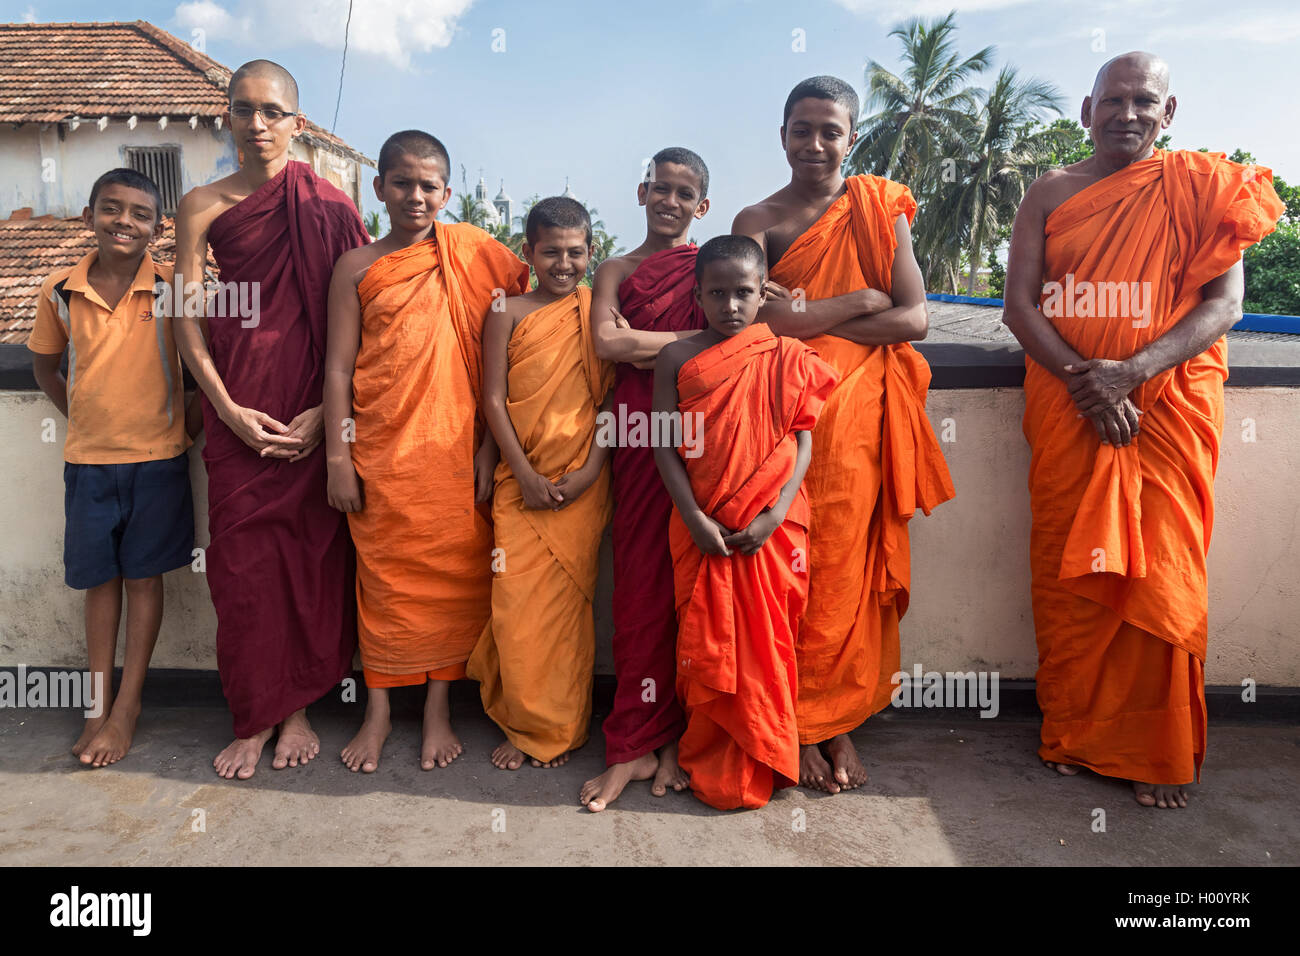 GALLE, SRI LANKA - MARCH 9, 2014: Group of buddhist monks wearing traditional orange robes. Galle is home of Fort Shri Sudarmala Stock Photo